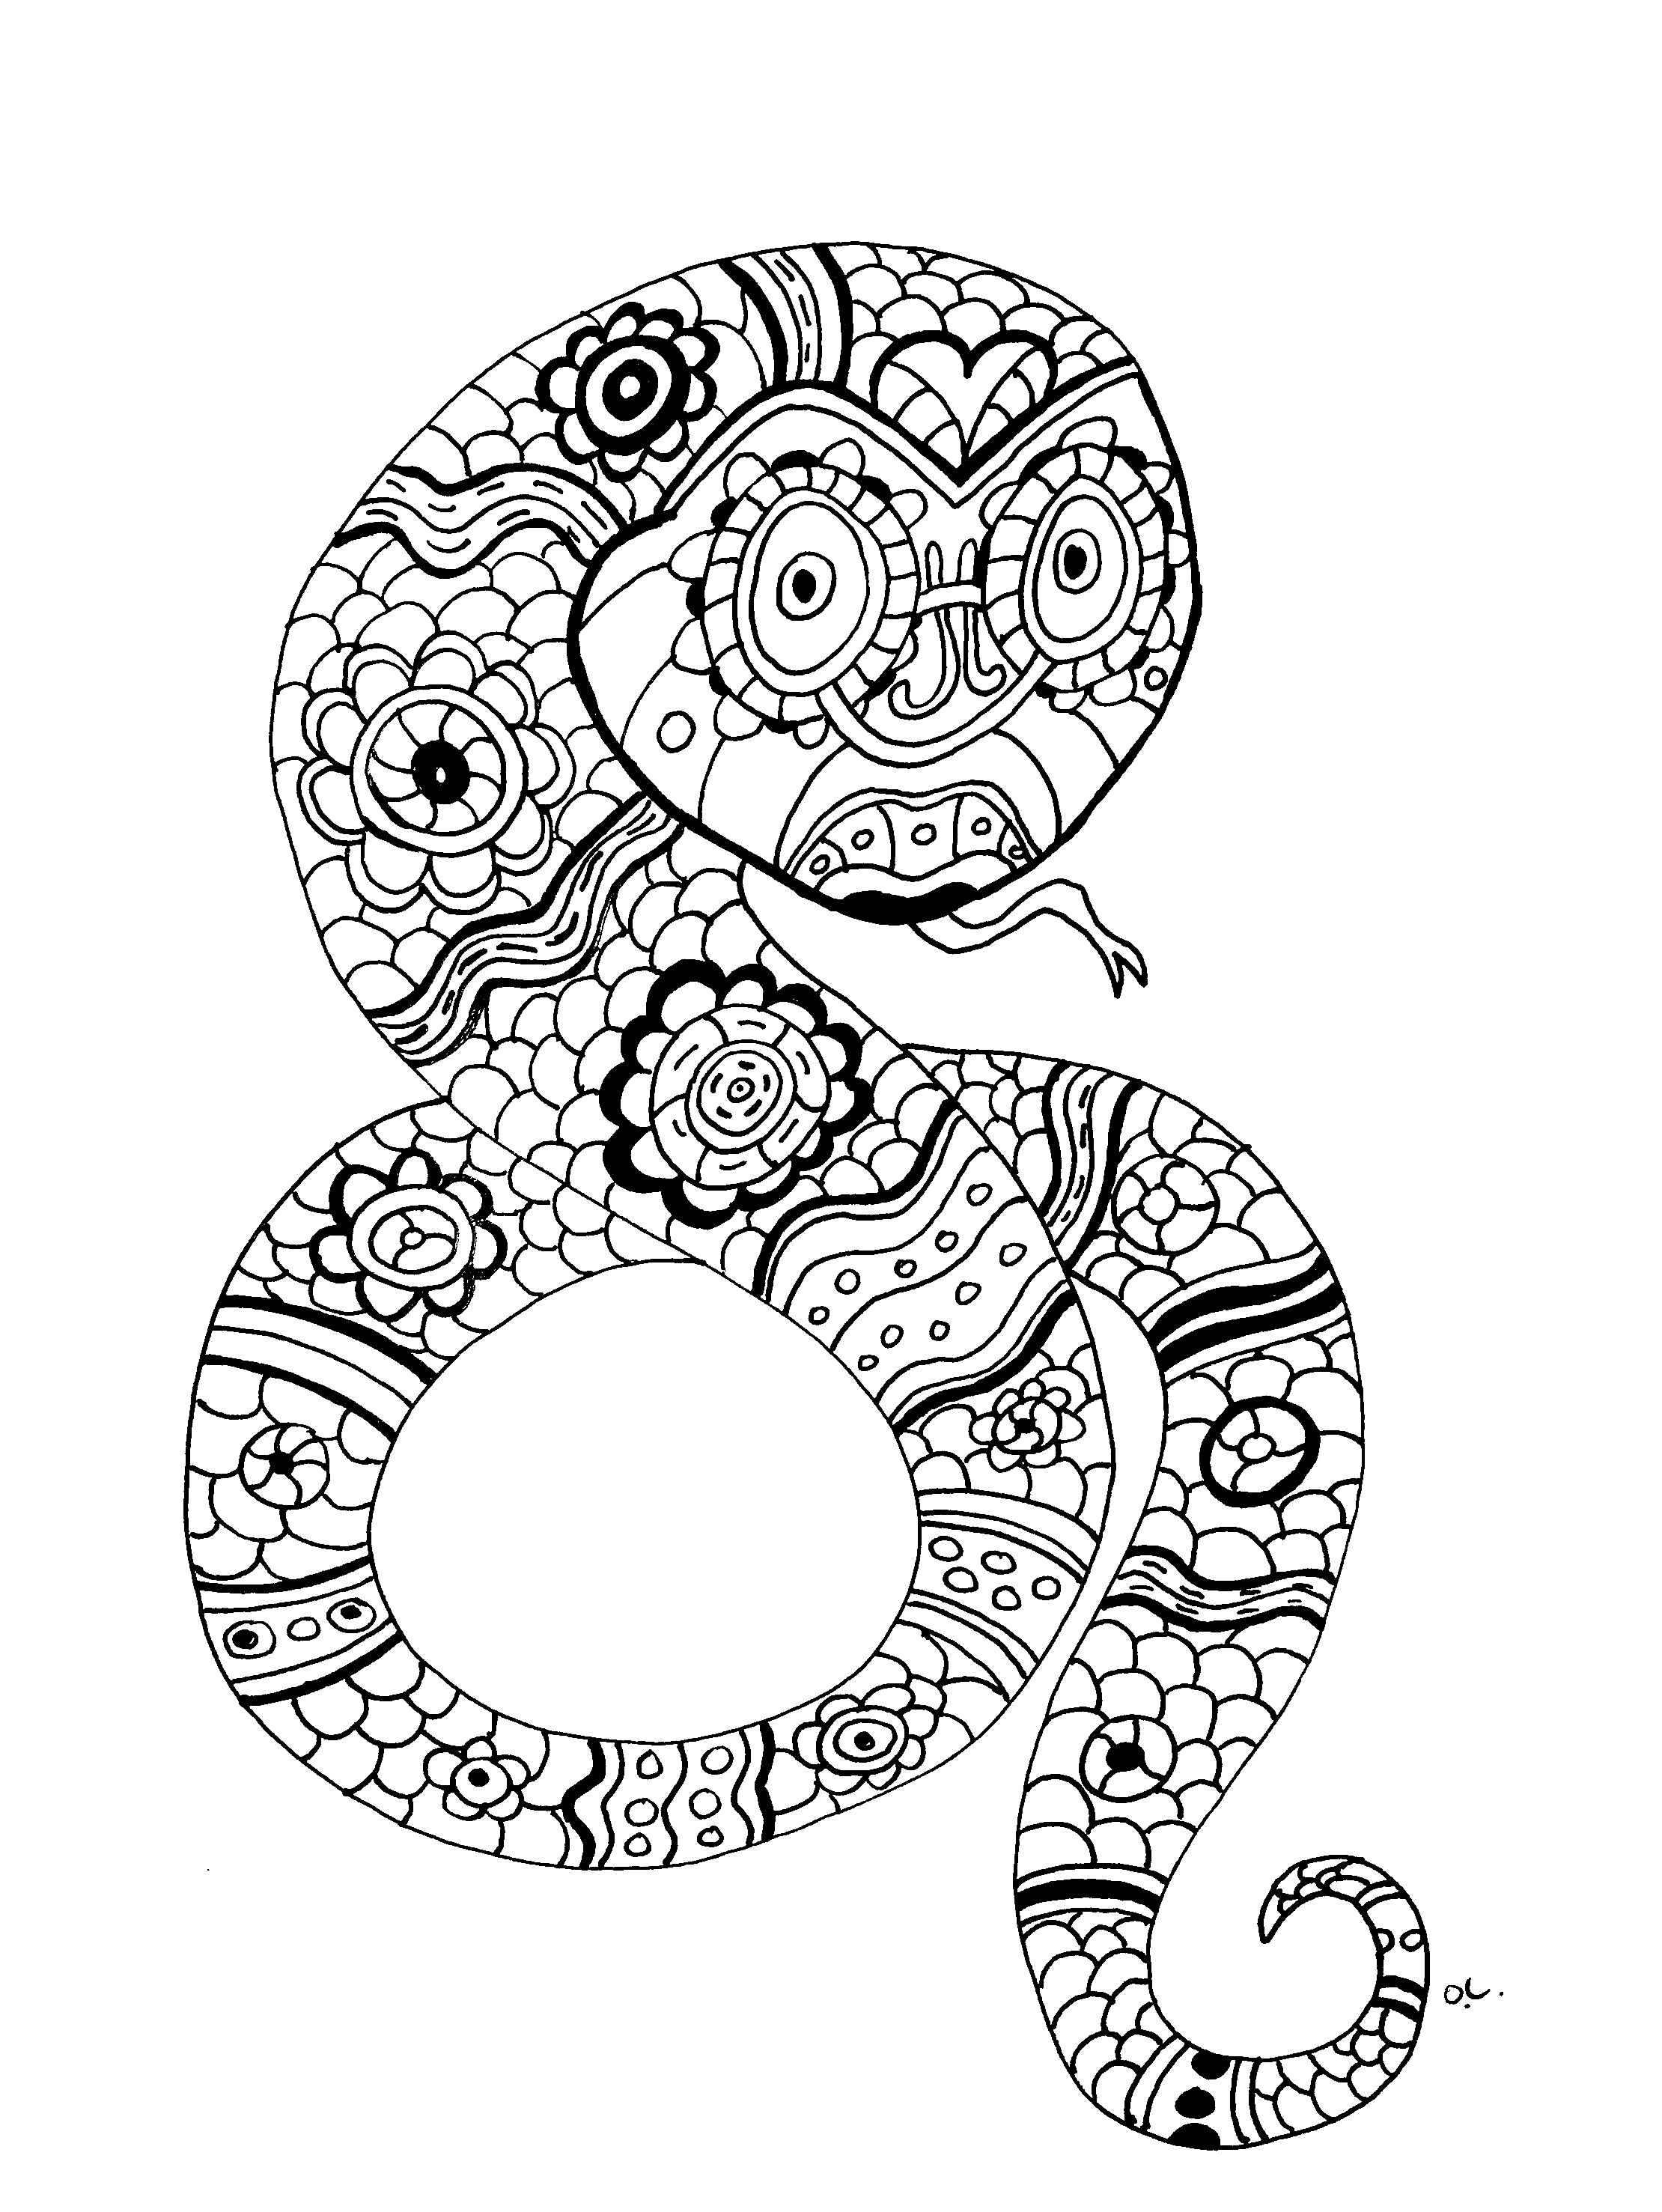 The snake by oliv Snakes Coloring pages for adults JustColor